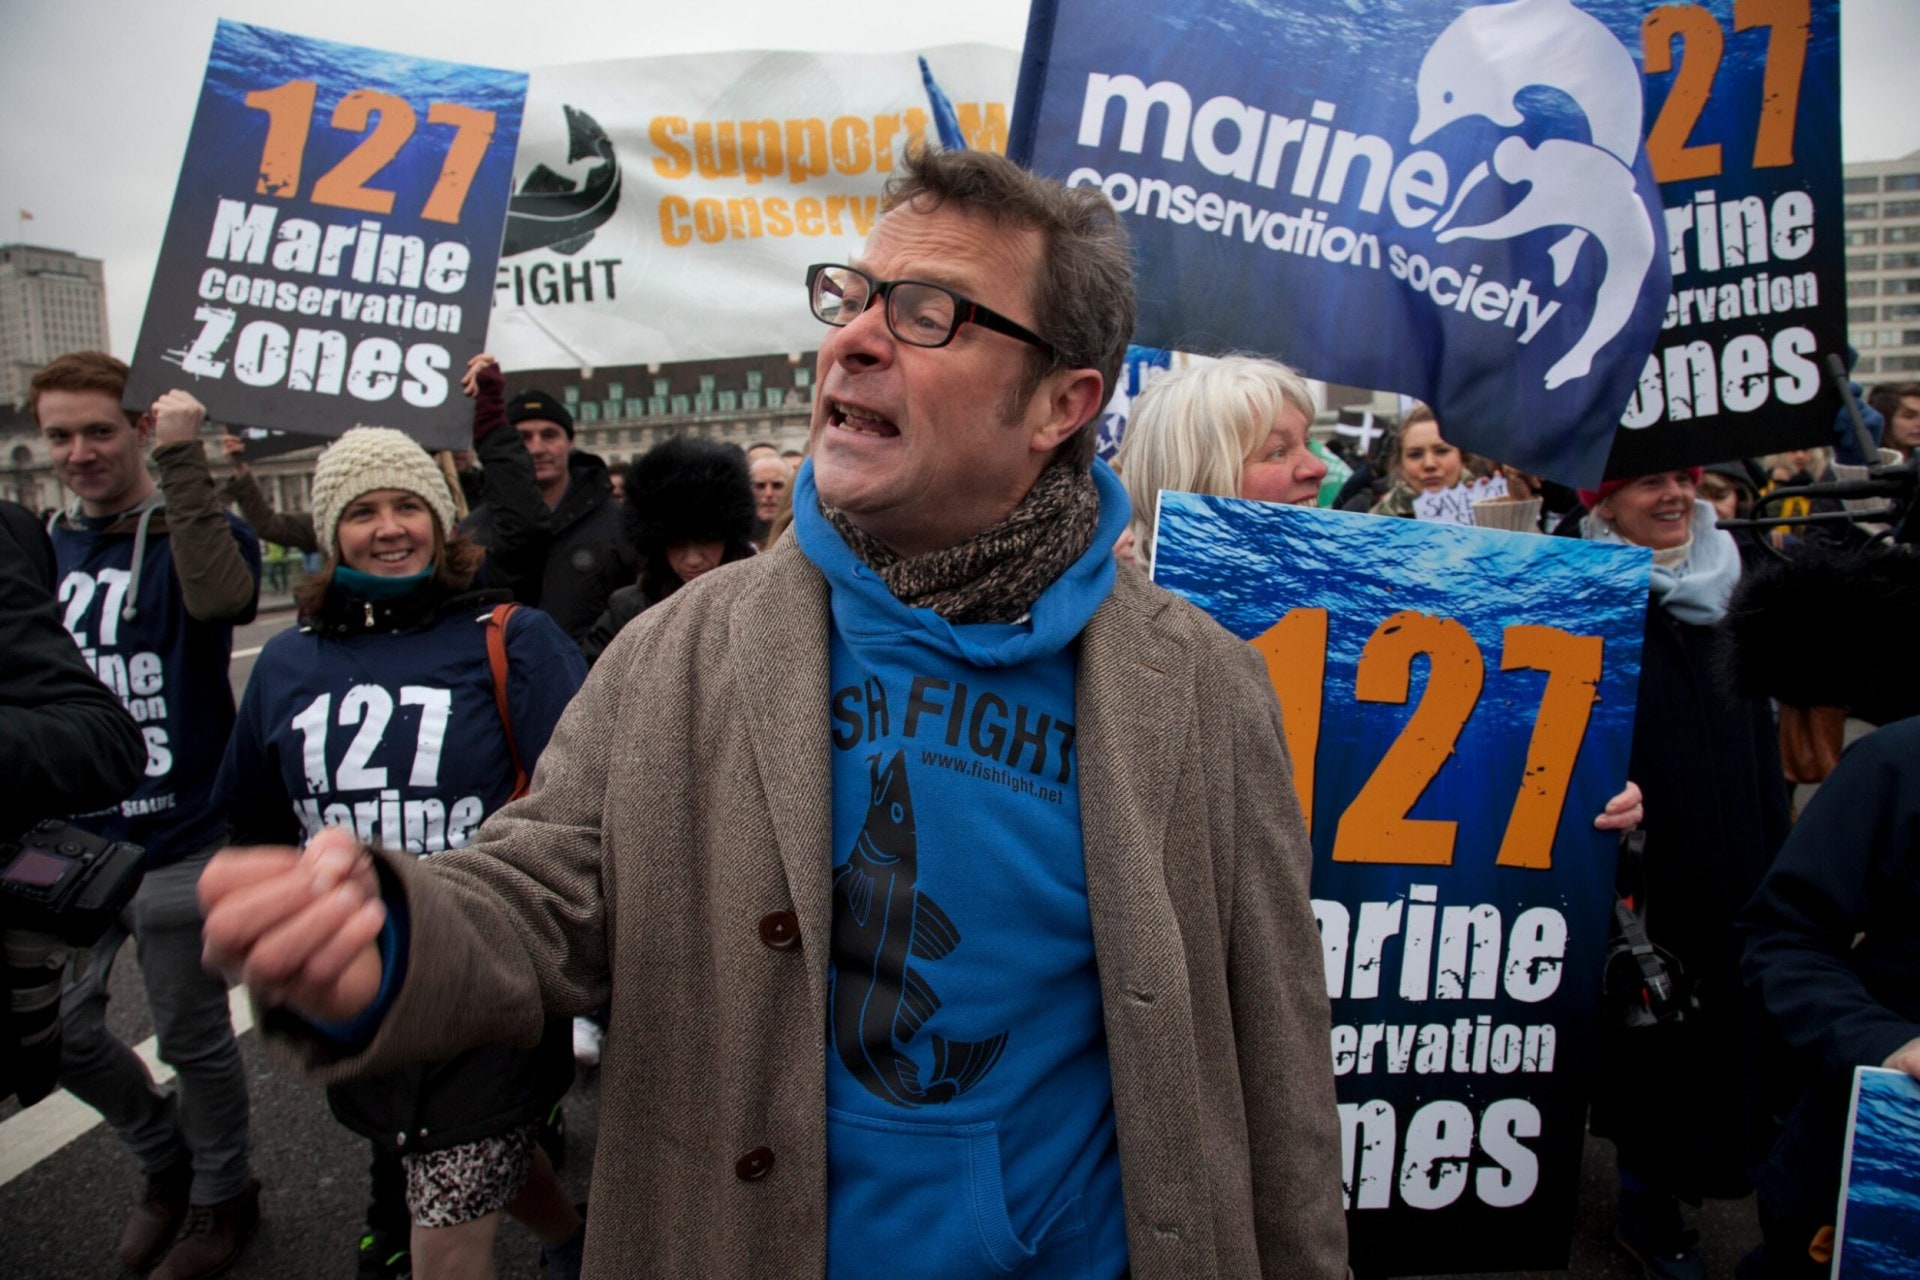 Hugh Fearnley-Whittingstall leading a protest march